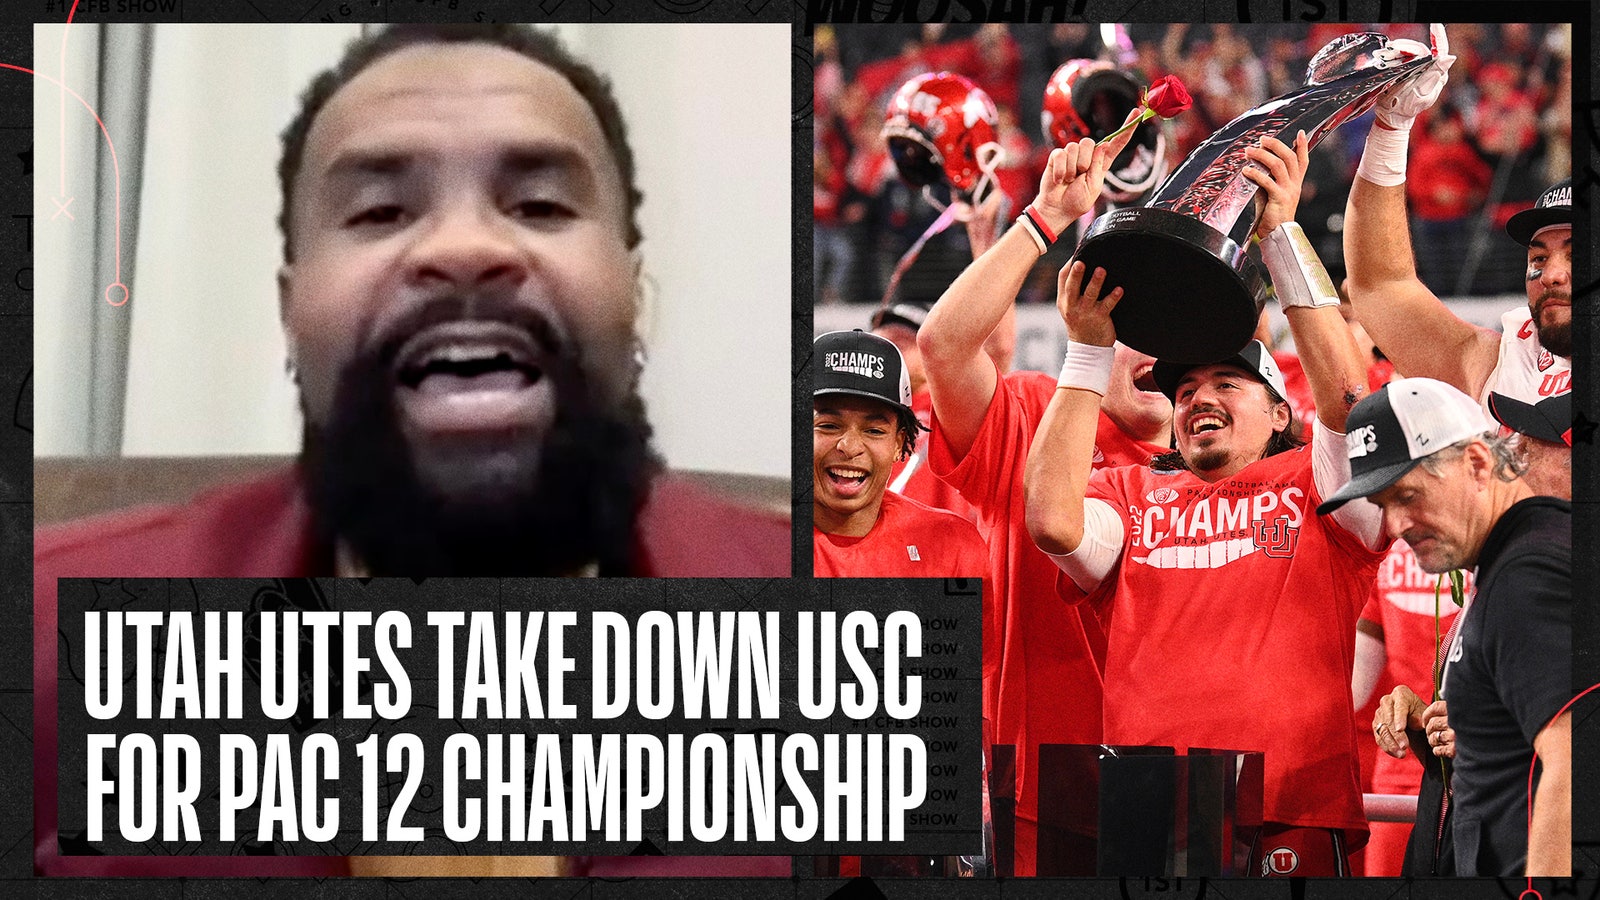 Utes repeat as Pac-12 champs